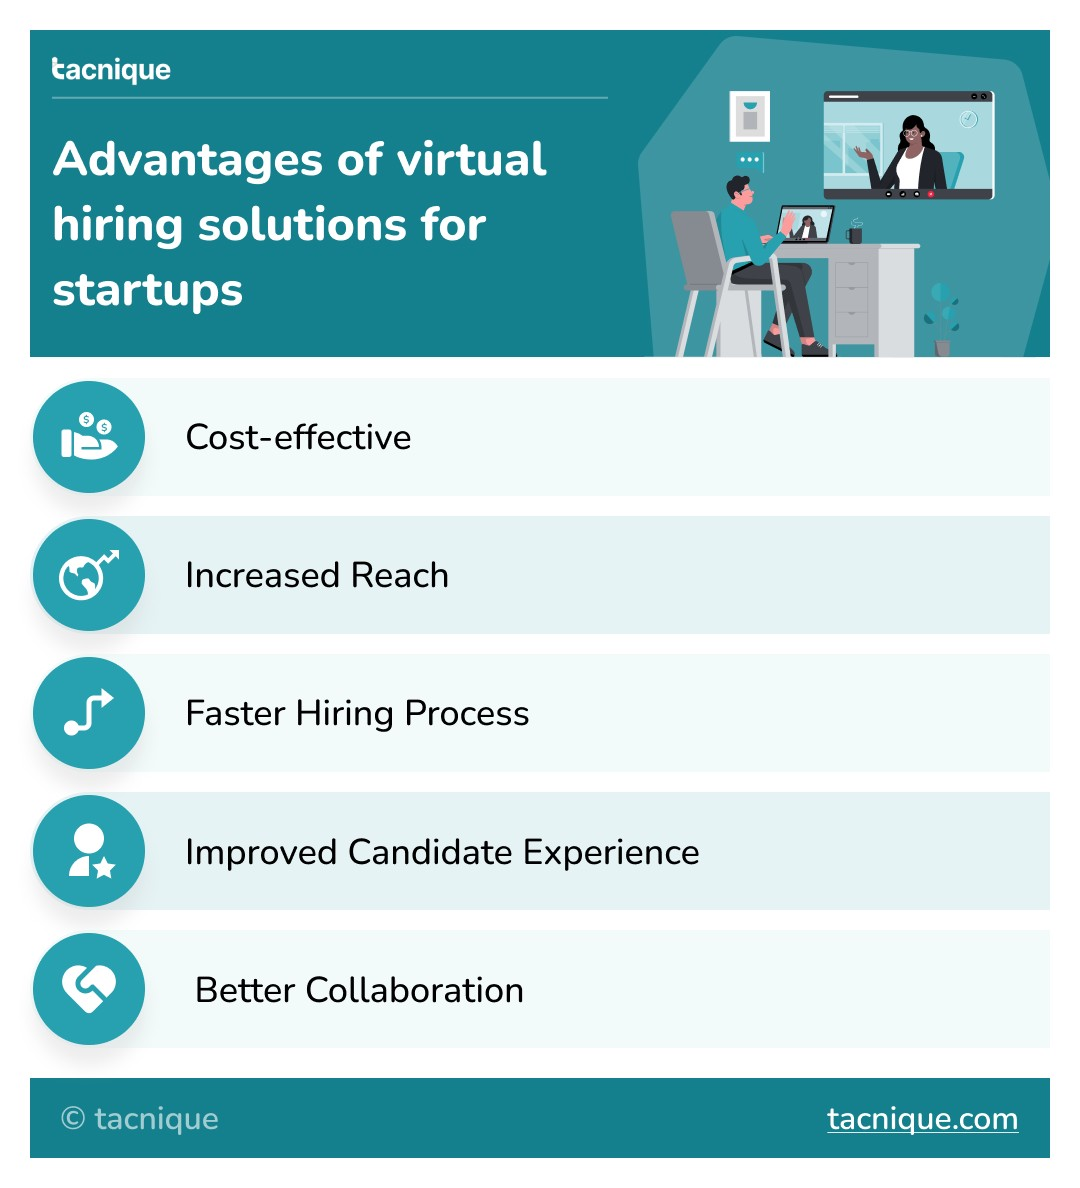 The Benefits of Virtual Hiring Solutions for Startups